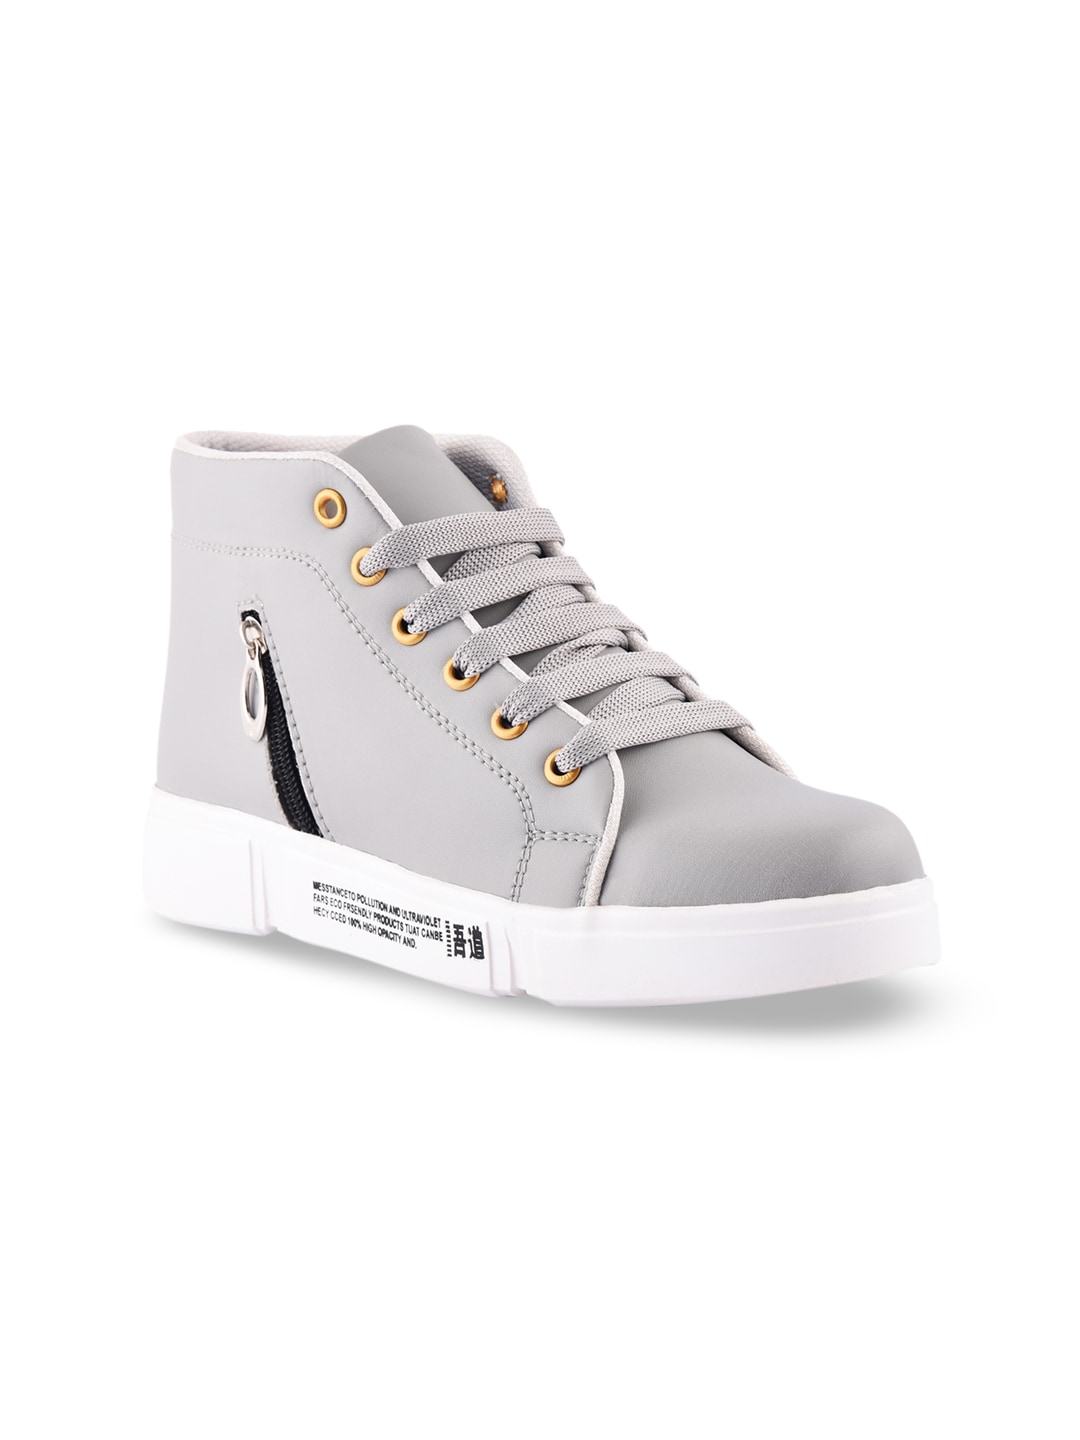 ZAPATOZ Women Grey Mid-Top Sneakers Price in India